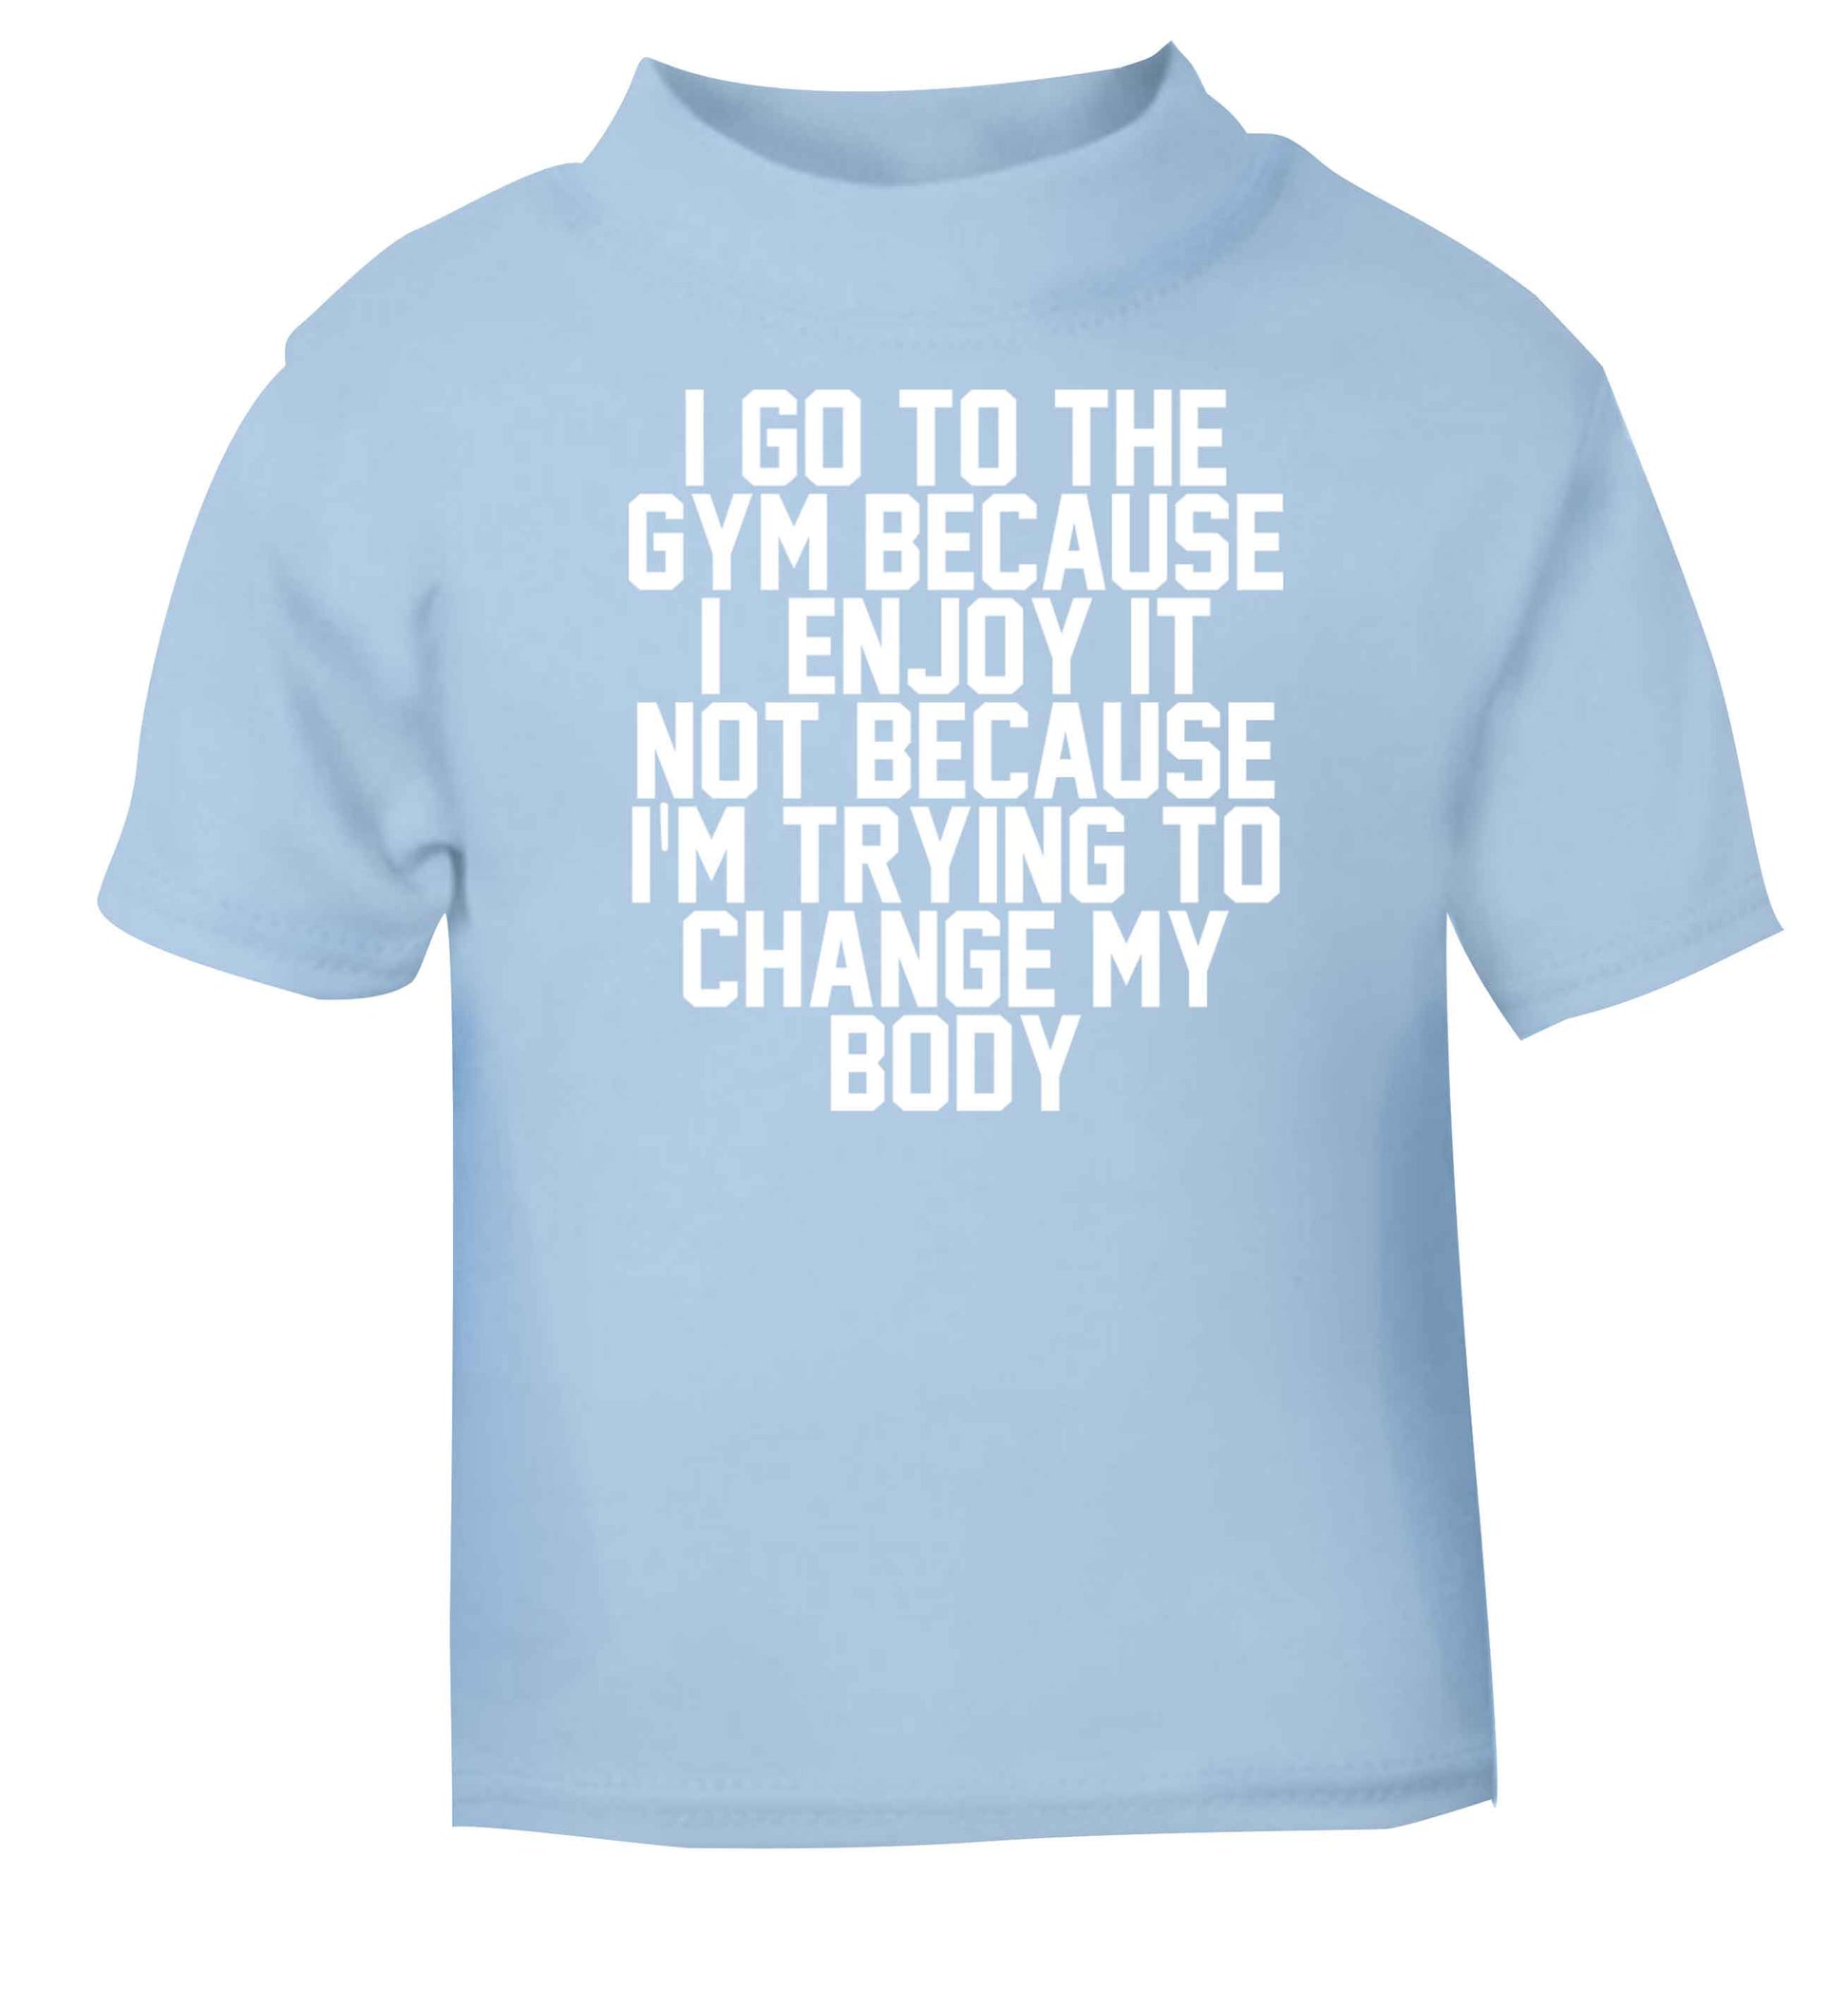 I go to the gym because I enjoy it not because I'm trying to change my body light blue baby toddler Tshirt 2 Years